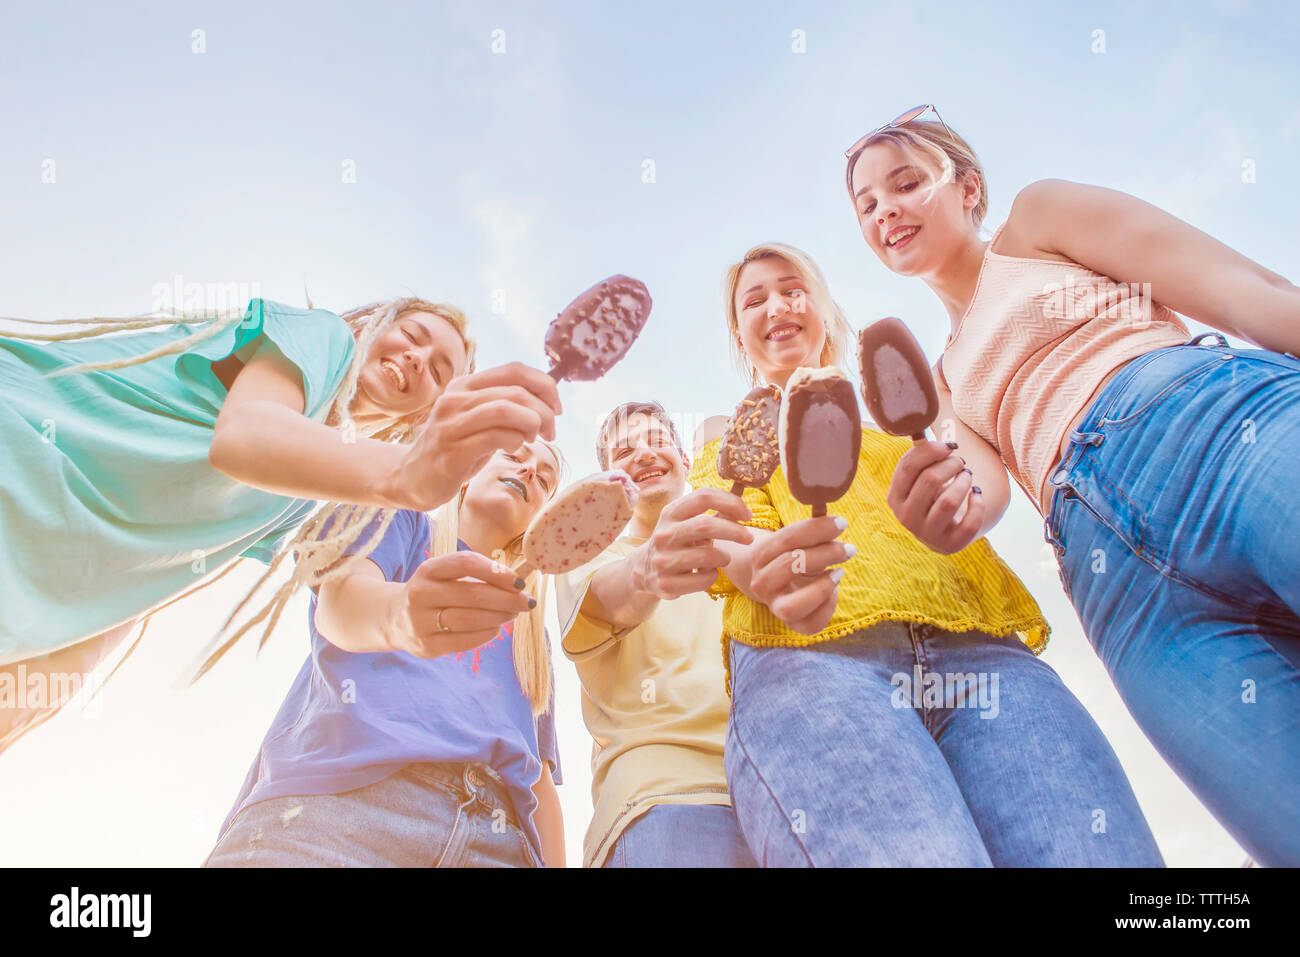 Group of young friends enjoying ice cream in the summer, view from below Stock Photo